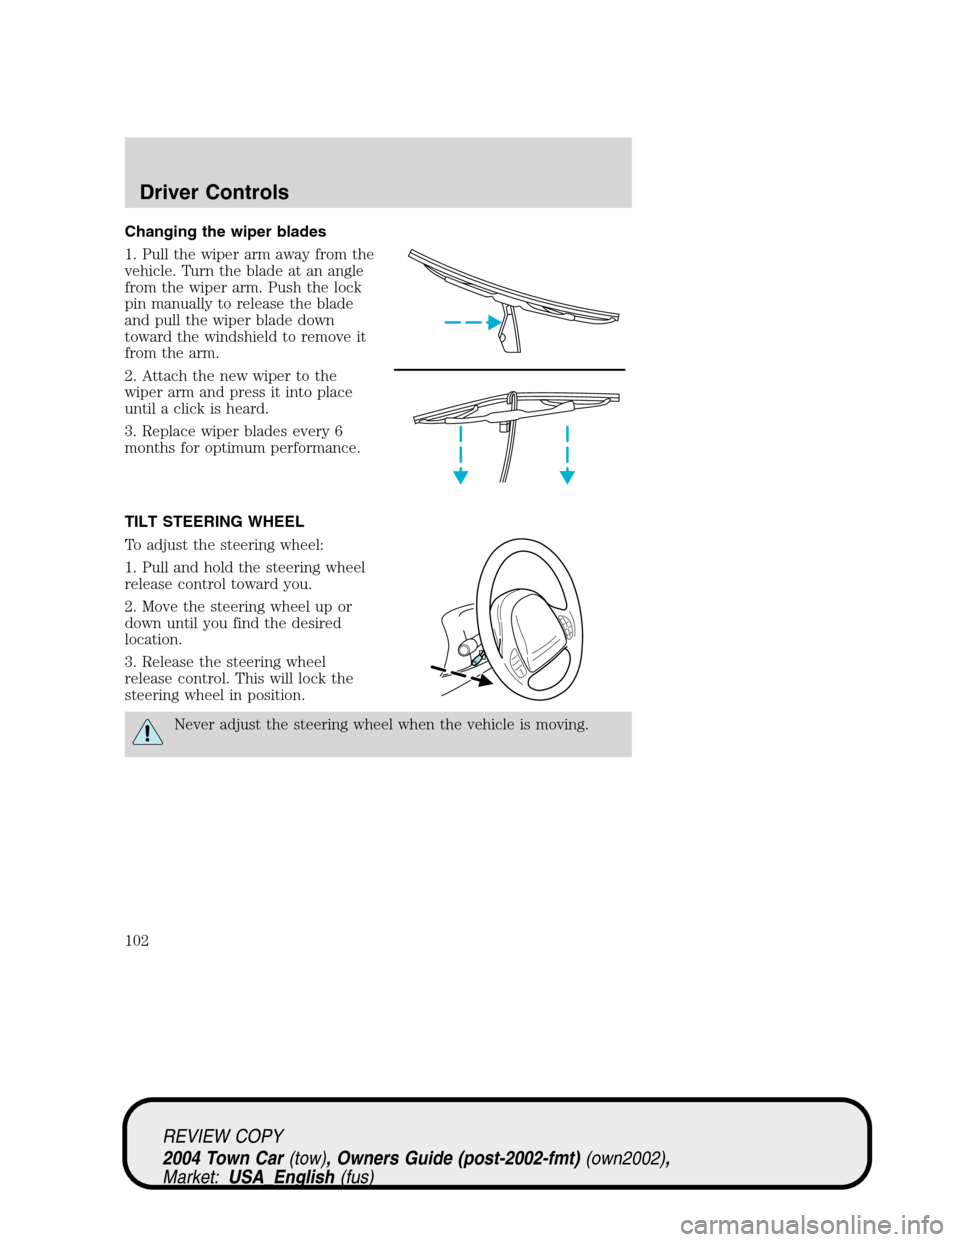 LINCOLN TOWN CAR 2004  Owners Manual Changing the wiper blades
1. Pull the wiper arm away from the
vehicle. Turn the blade at an angle
from the wiper arm. Push the lock
pin manually to release the blade
and pull the wiper blade down
towa